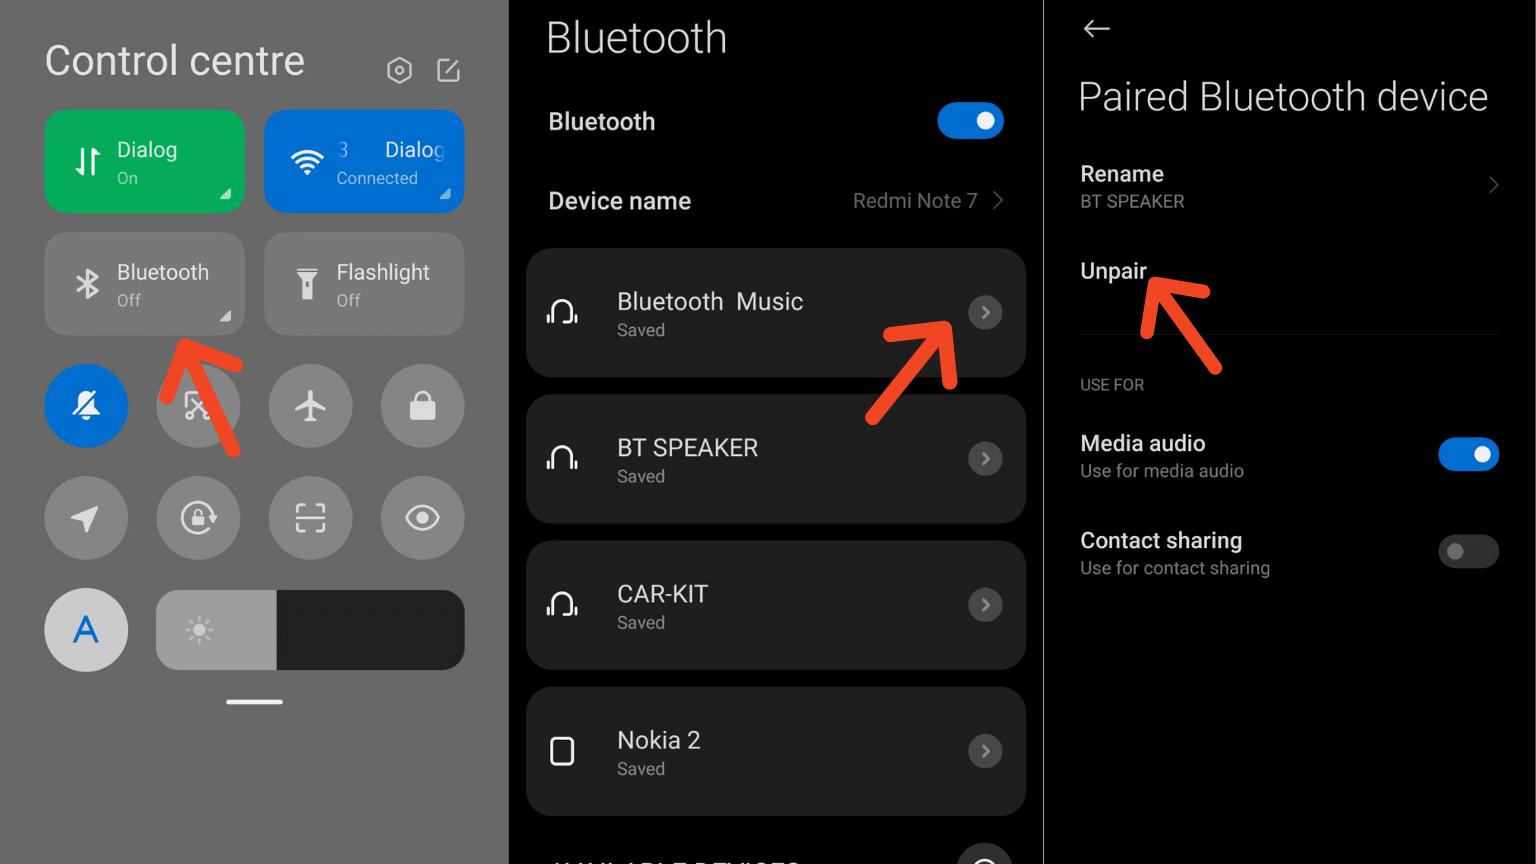 Bluetooth share has stopped